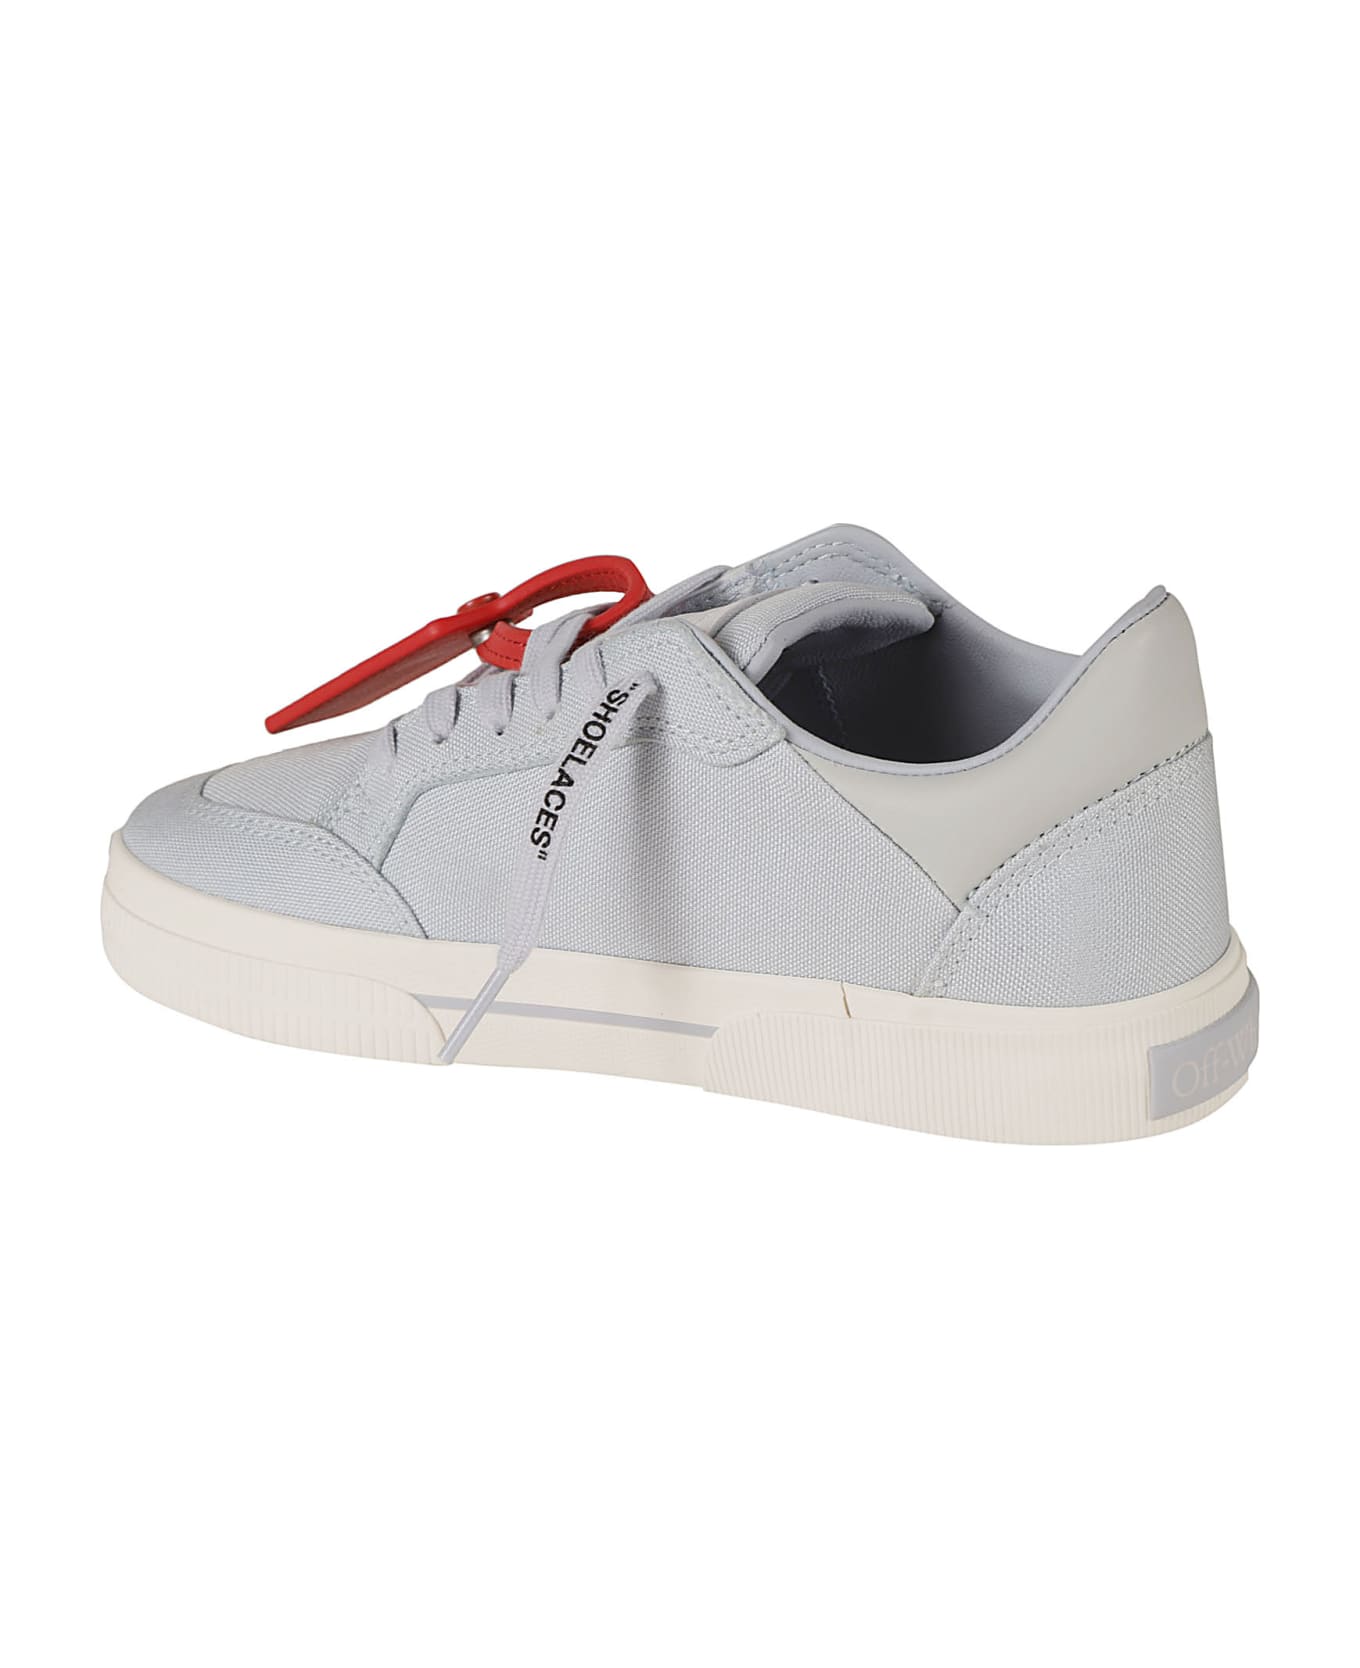 Off-White New Low Vulcanized Canvas Sneakers - Light Blue/White